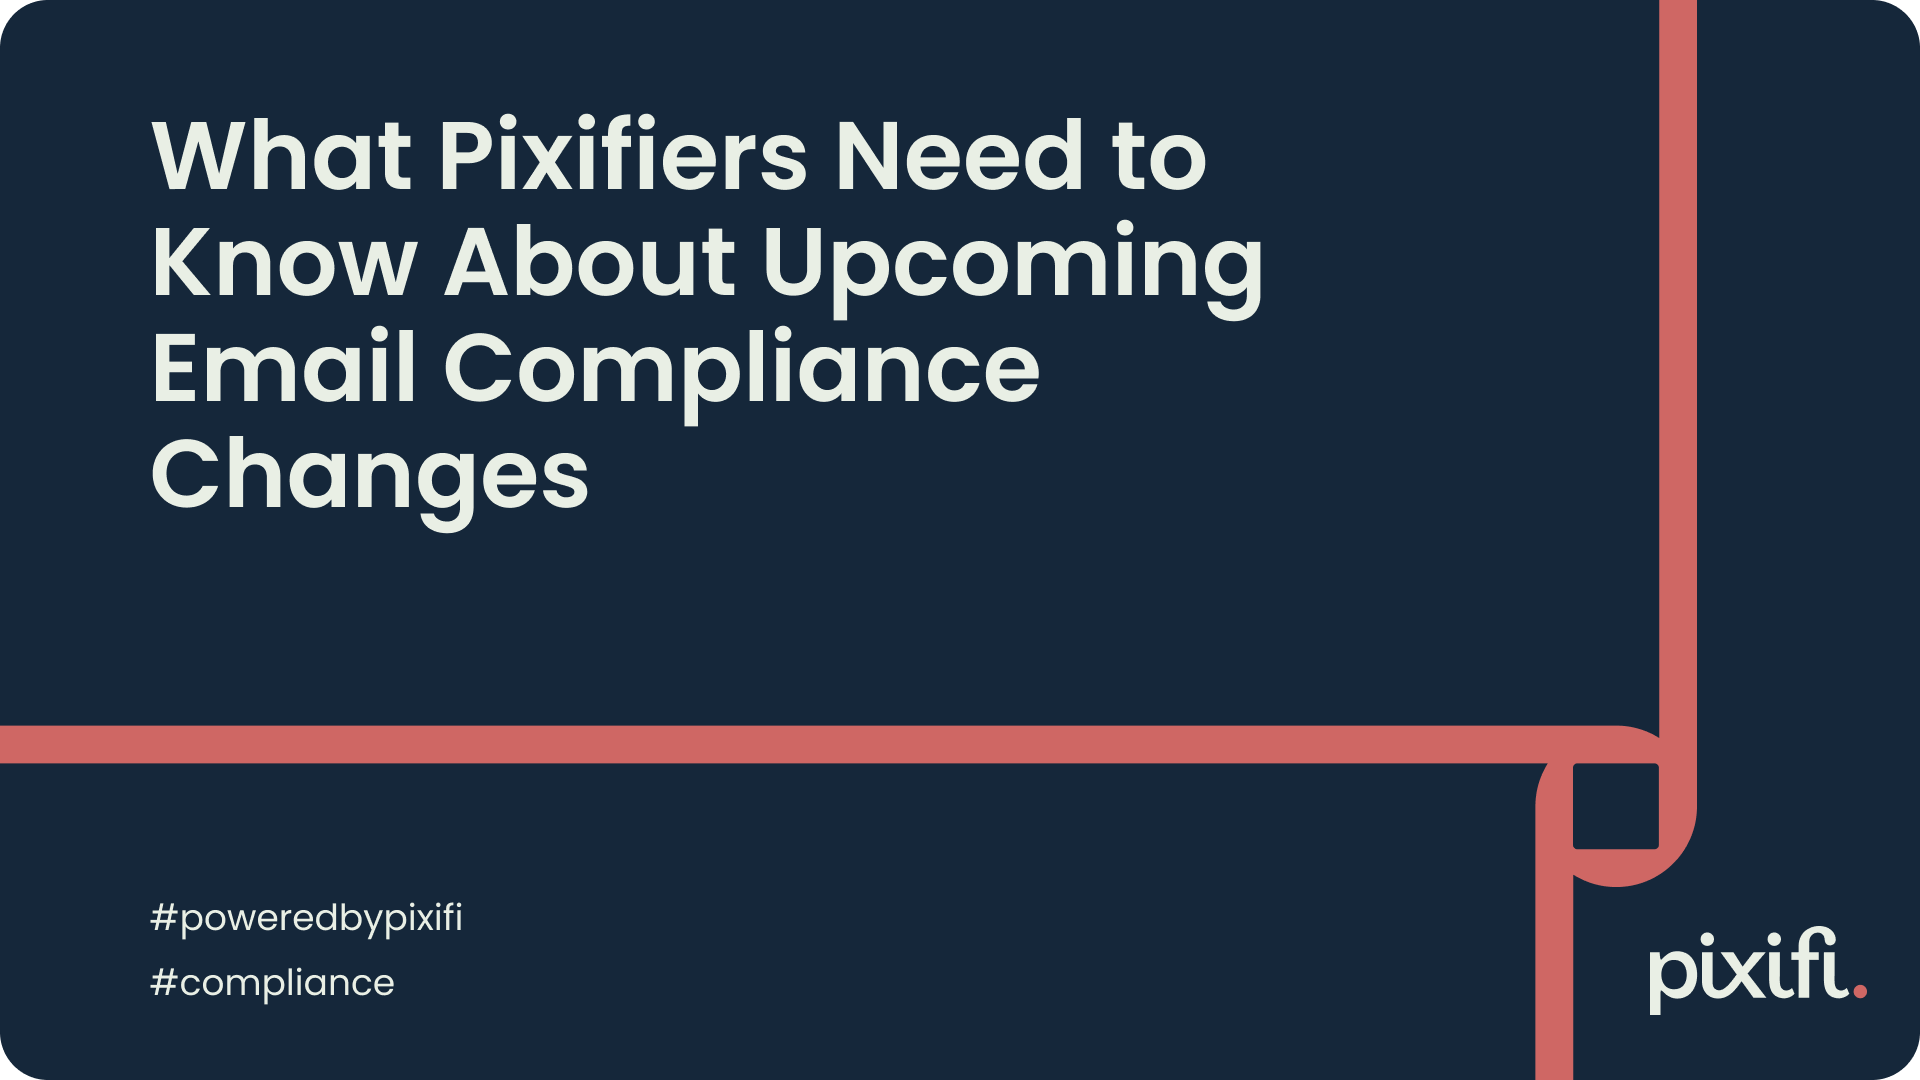 What Pixifiers Need to Know About Upcoming Email Compliance Changes